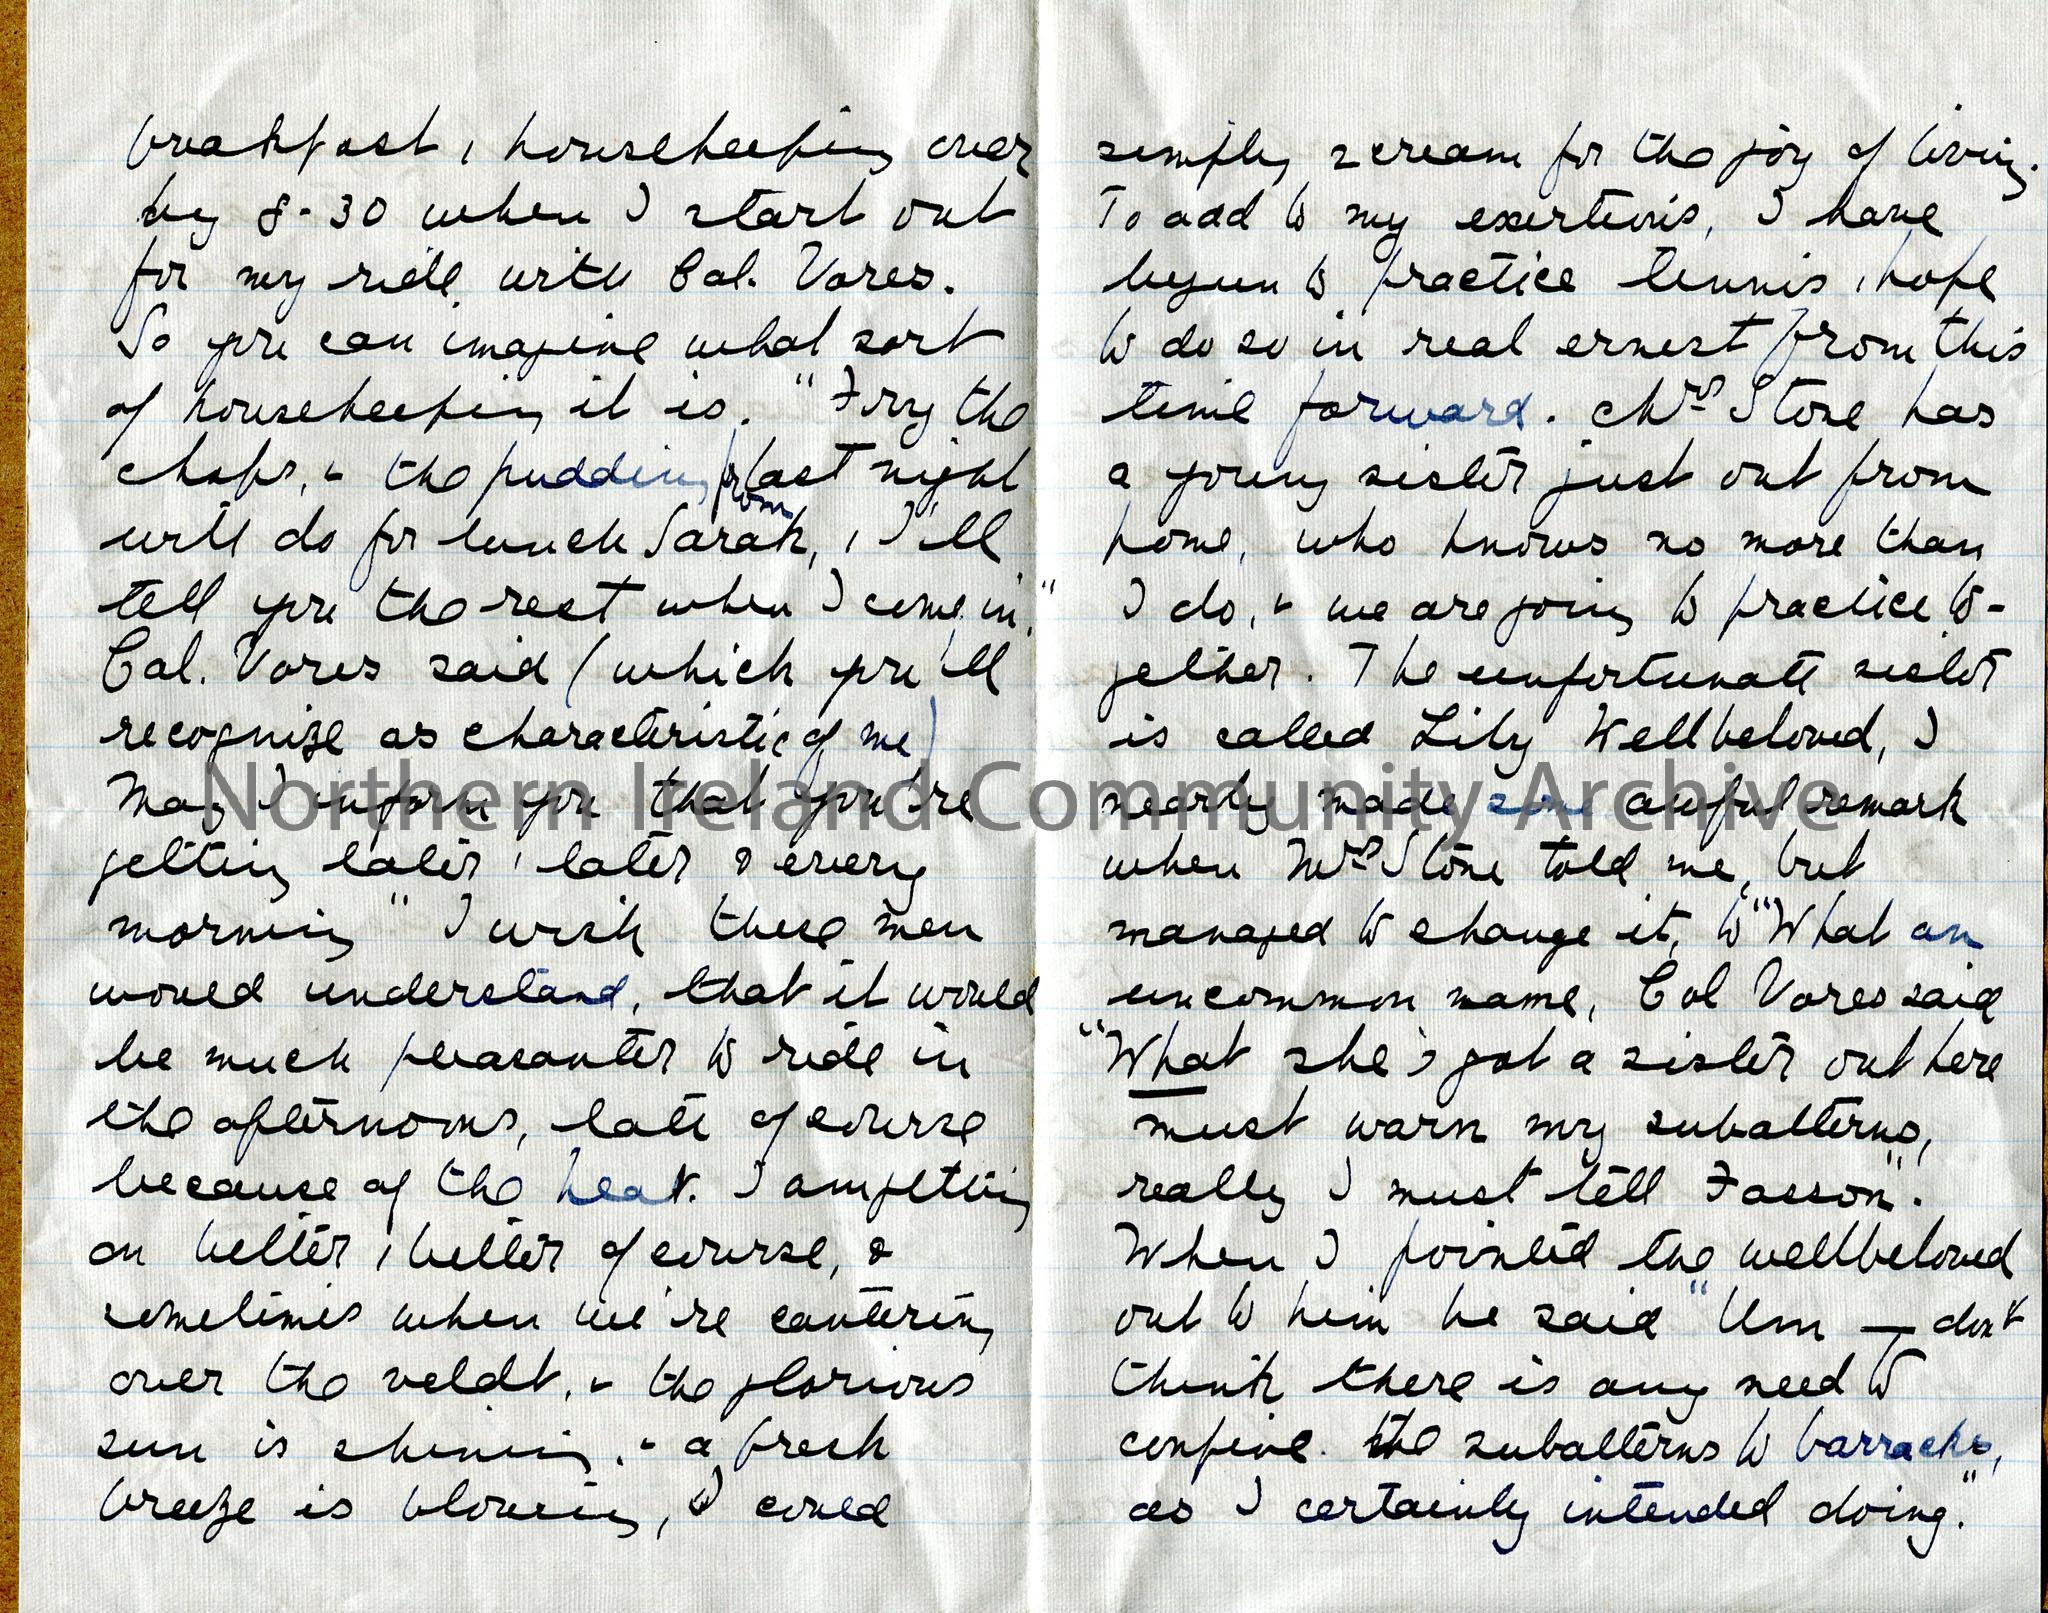 One of 2 double pages of handwritten letter. Comments on Dutch dress style. Regular horse rides in the mornings. Describes gymkhana event and a Major … – img034b